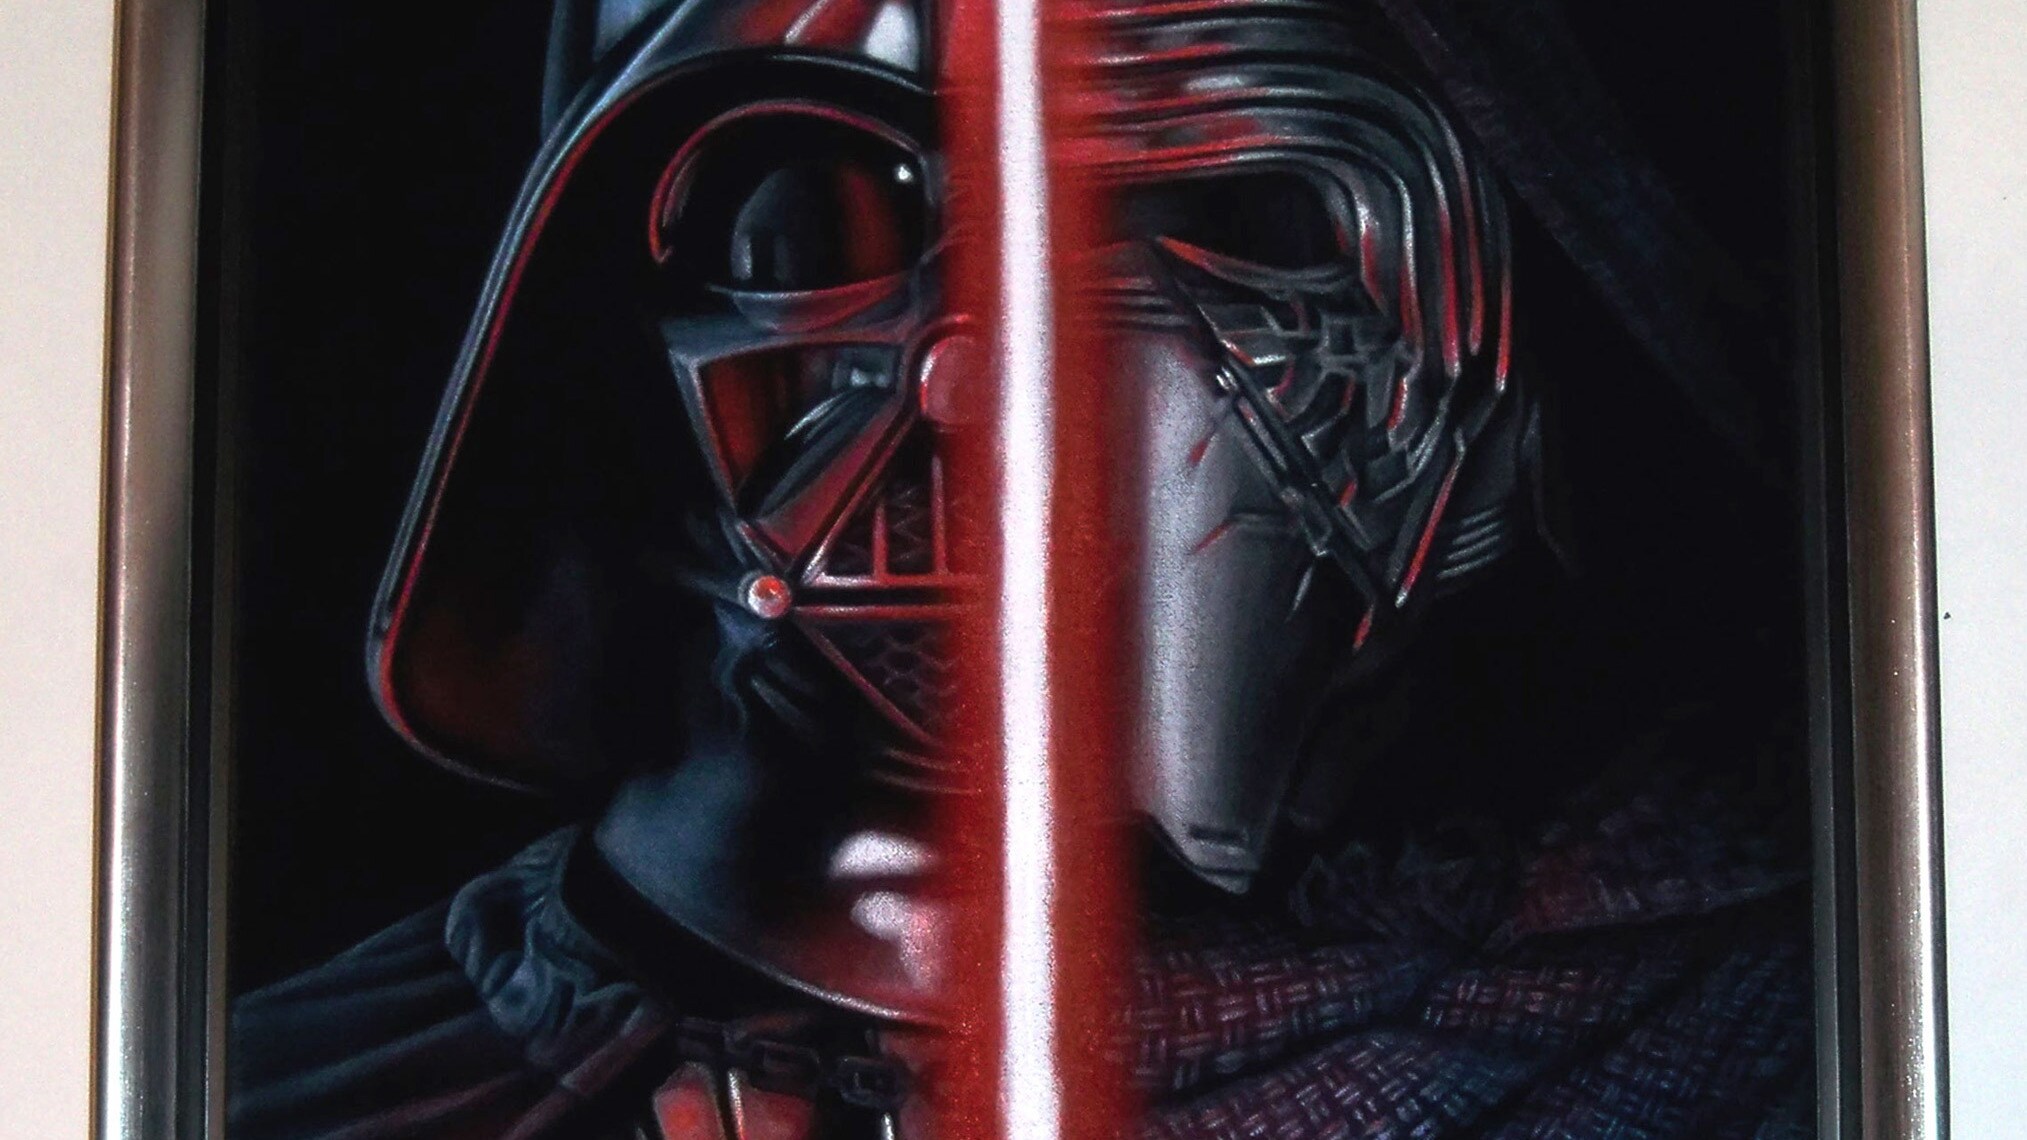 Art Awakens Gallery Event Celebrates the Dark Side, the Light Side, and a Good Cause